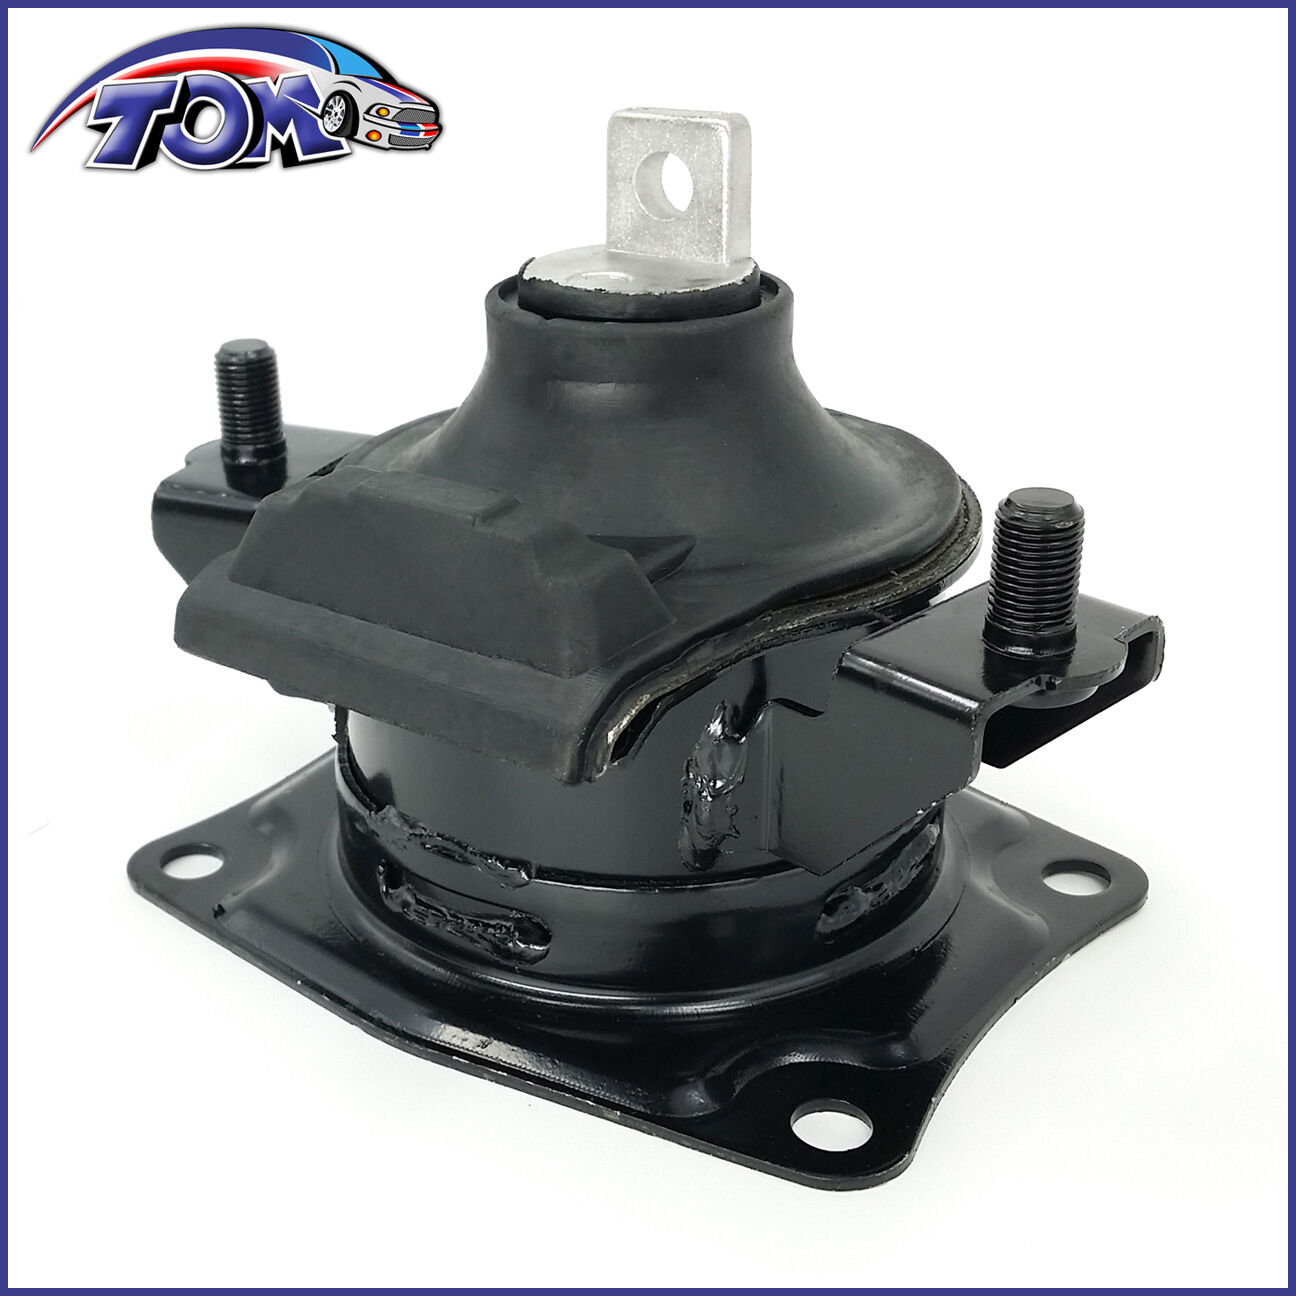 Brand New Rear Engine Motor Mount For Acura TSX Honda Accord 2.4L for Auto